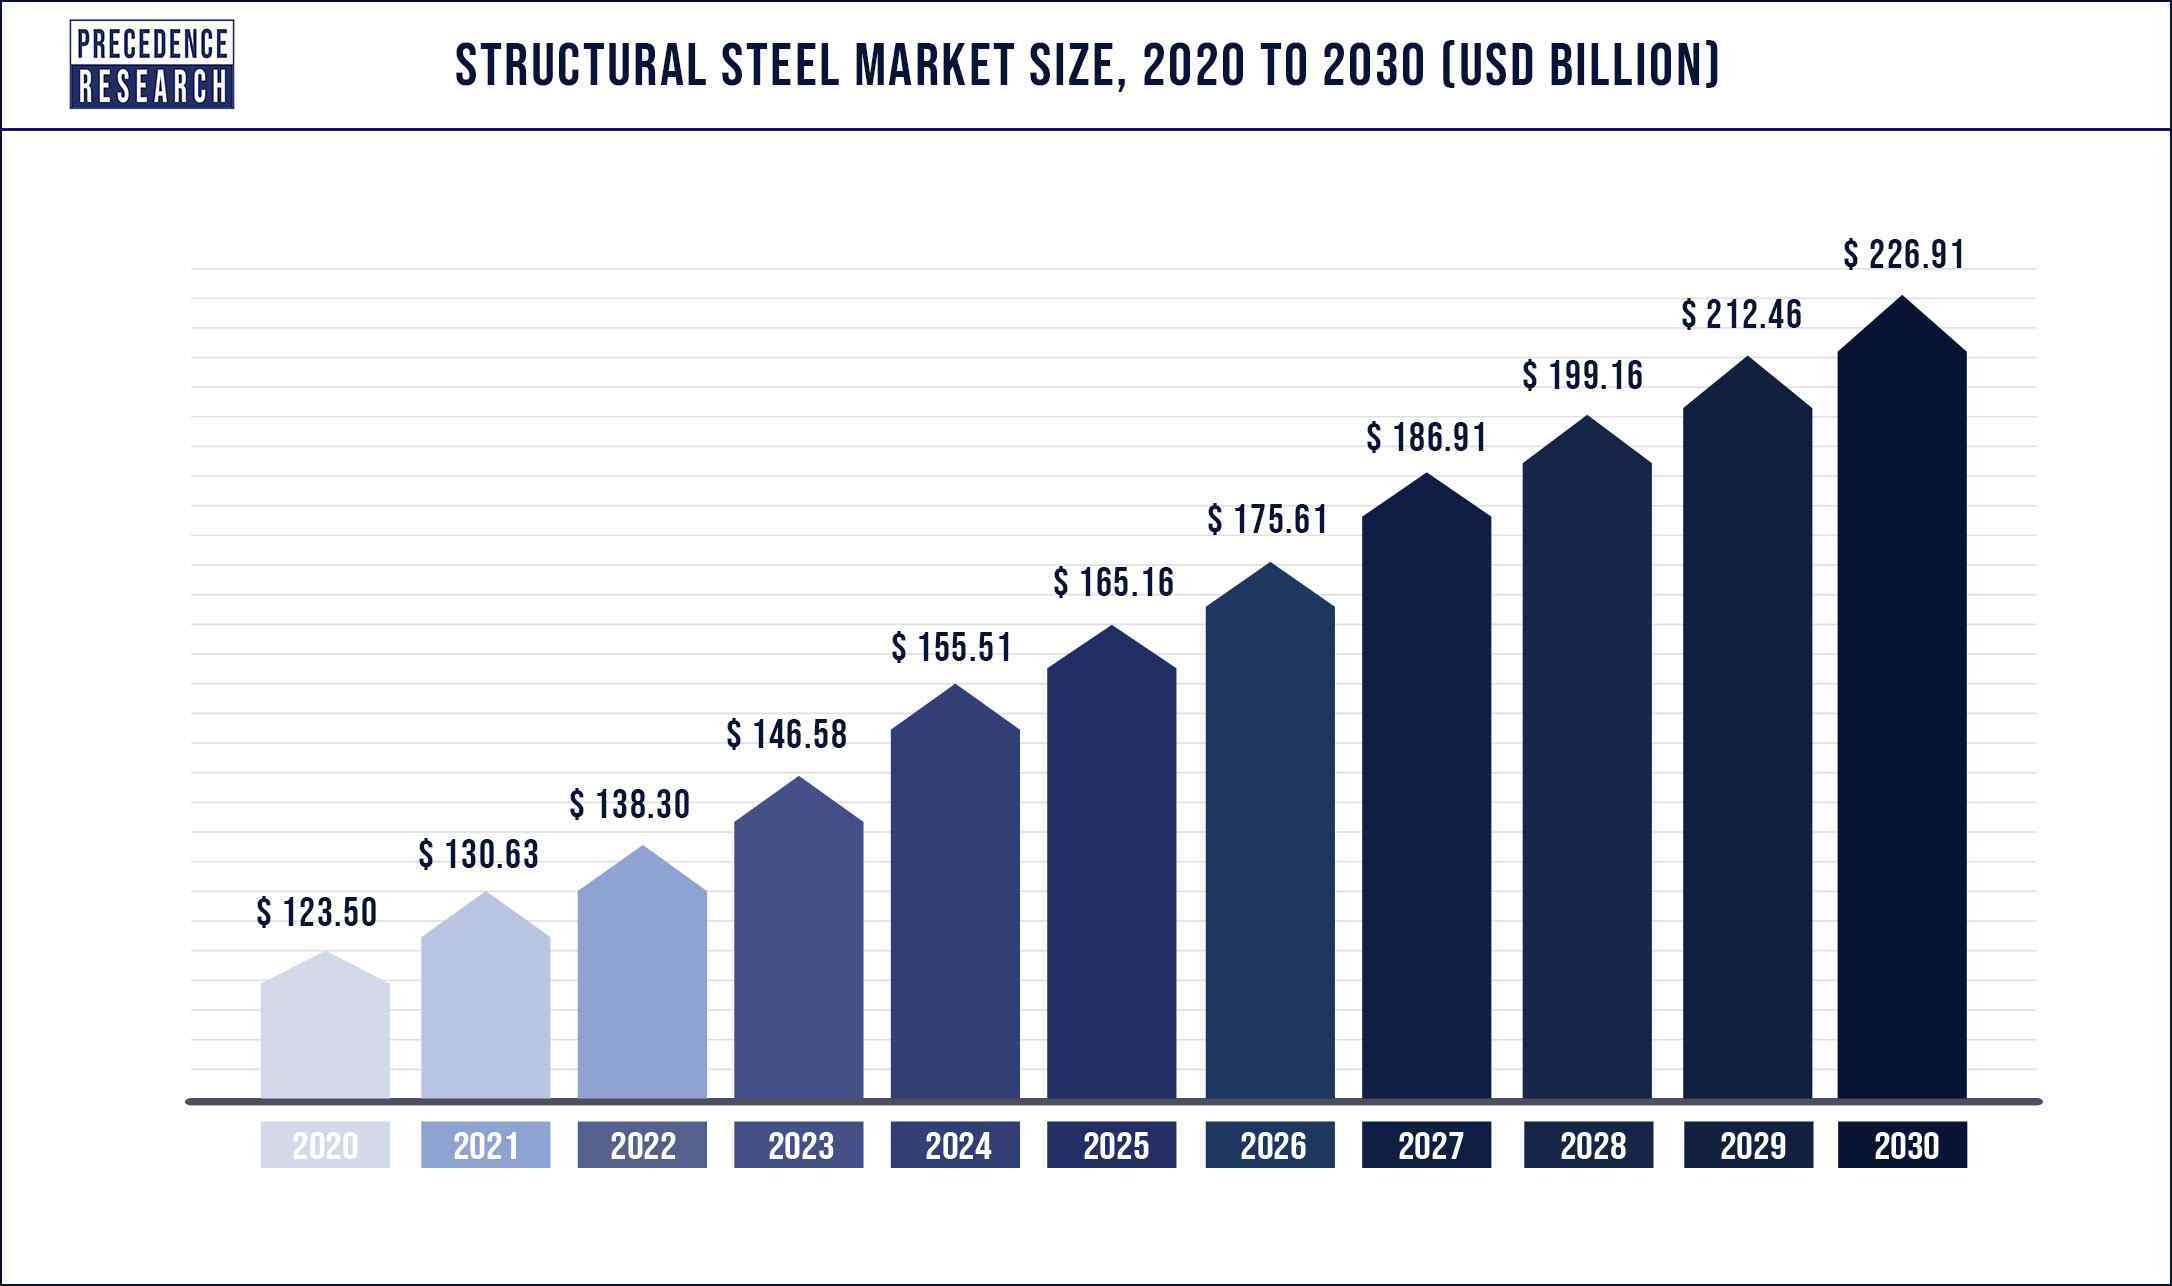 Structural Steel Market Size 2020 to 2030